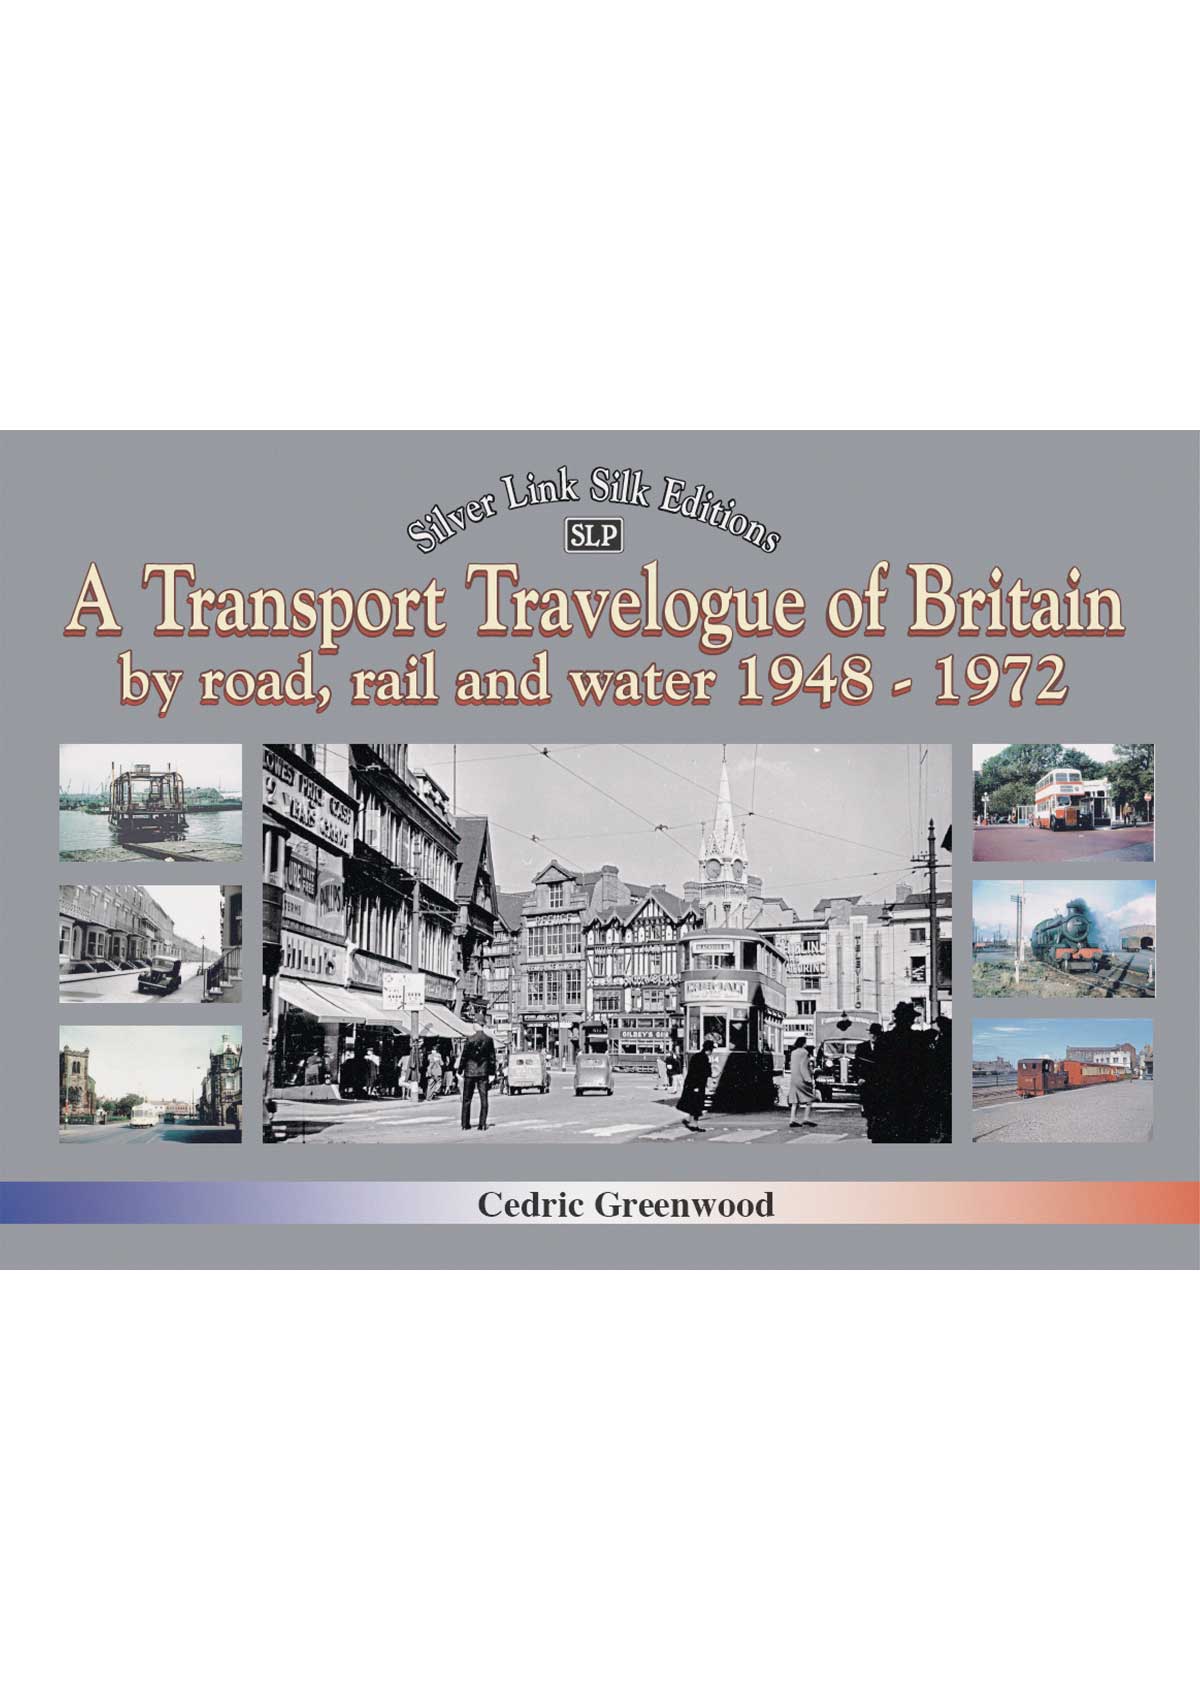 Transport Travelogue of Britain by Road, Rail and Water 1948-1972, A. 